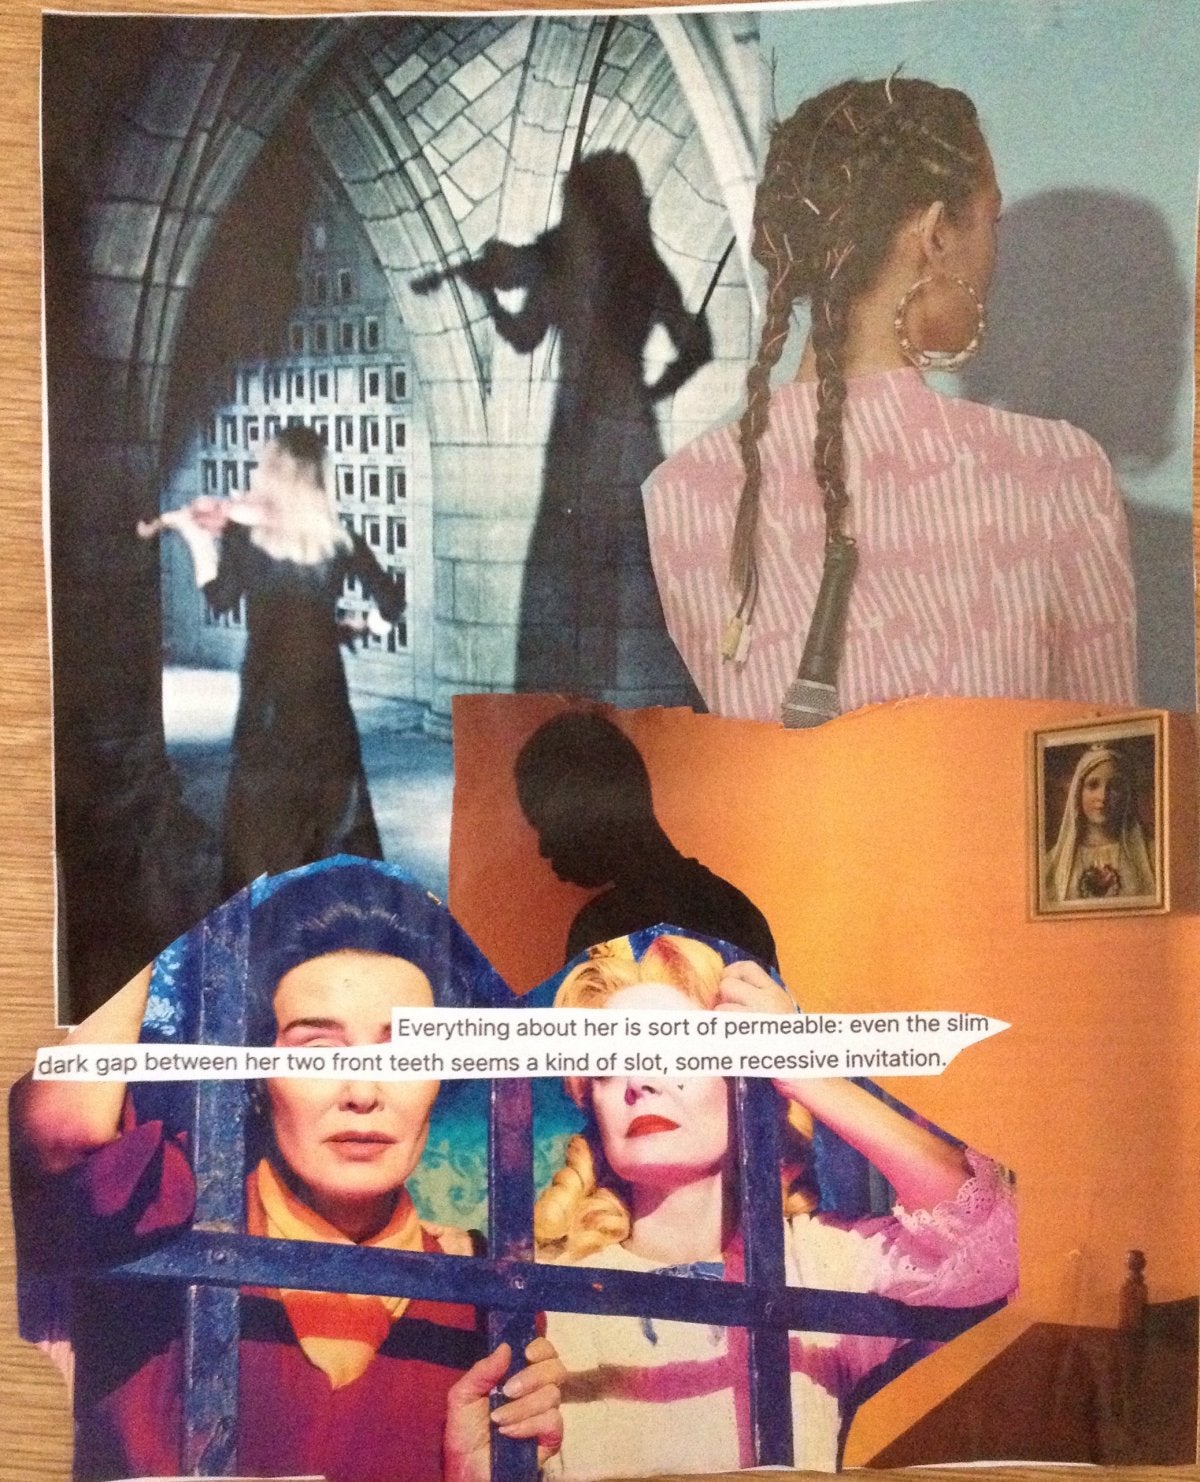 Collage on a piece of printer paper, using images from The New Yorker magazine and LA Weekly magazine. The quote on the image is from "Little Expressionless Animals."